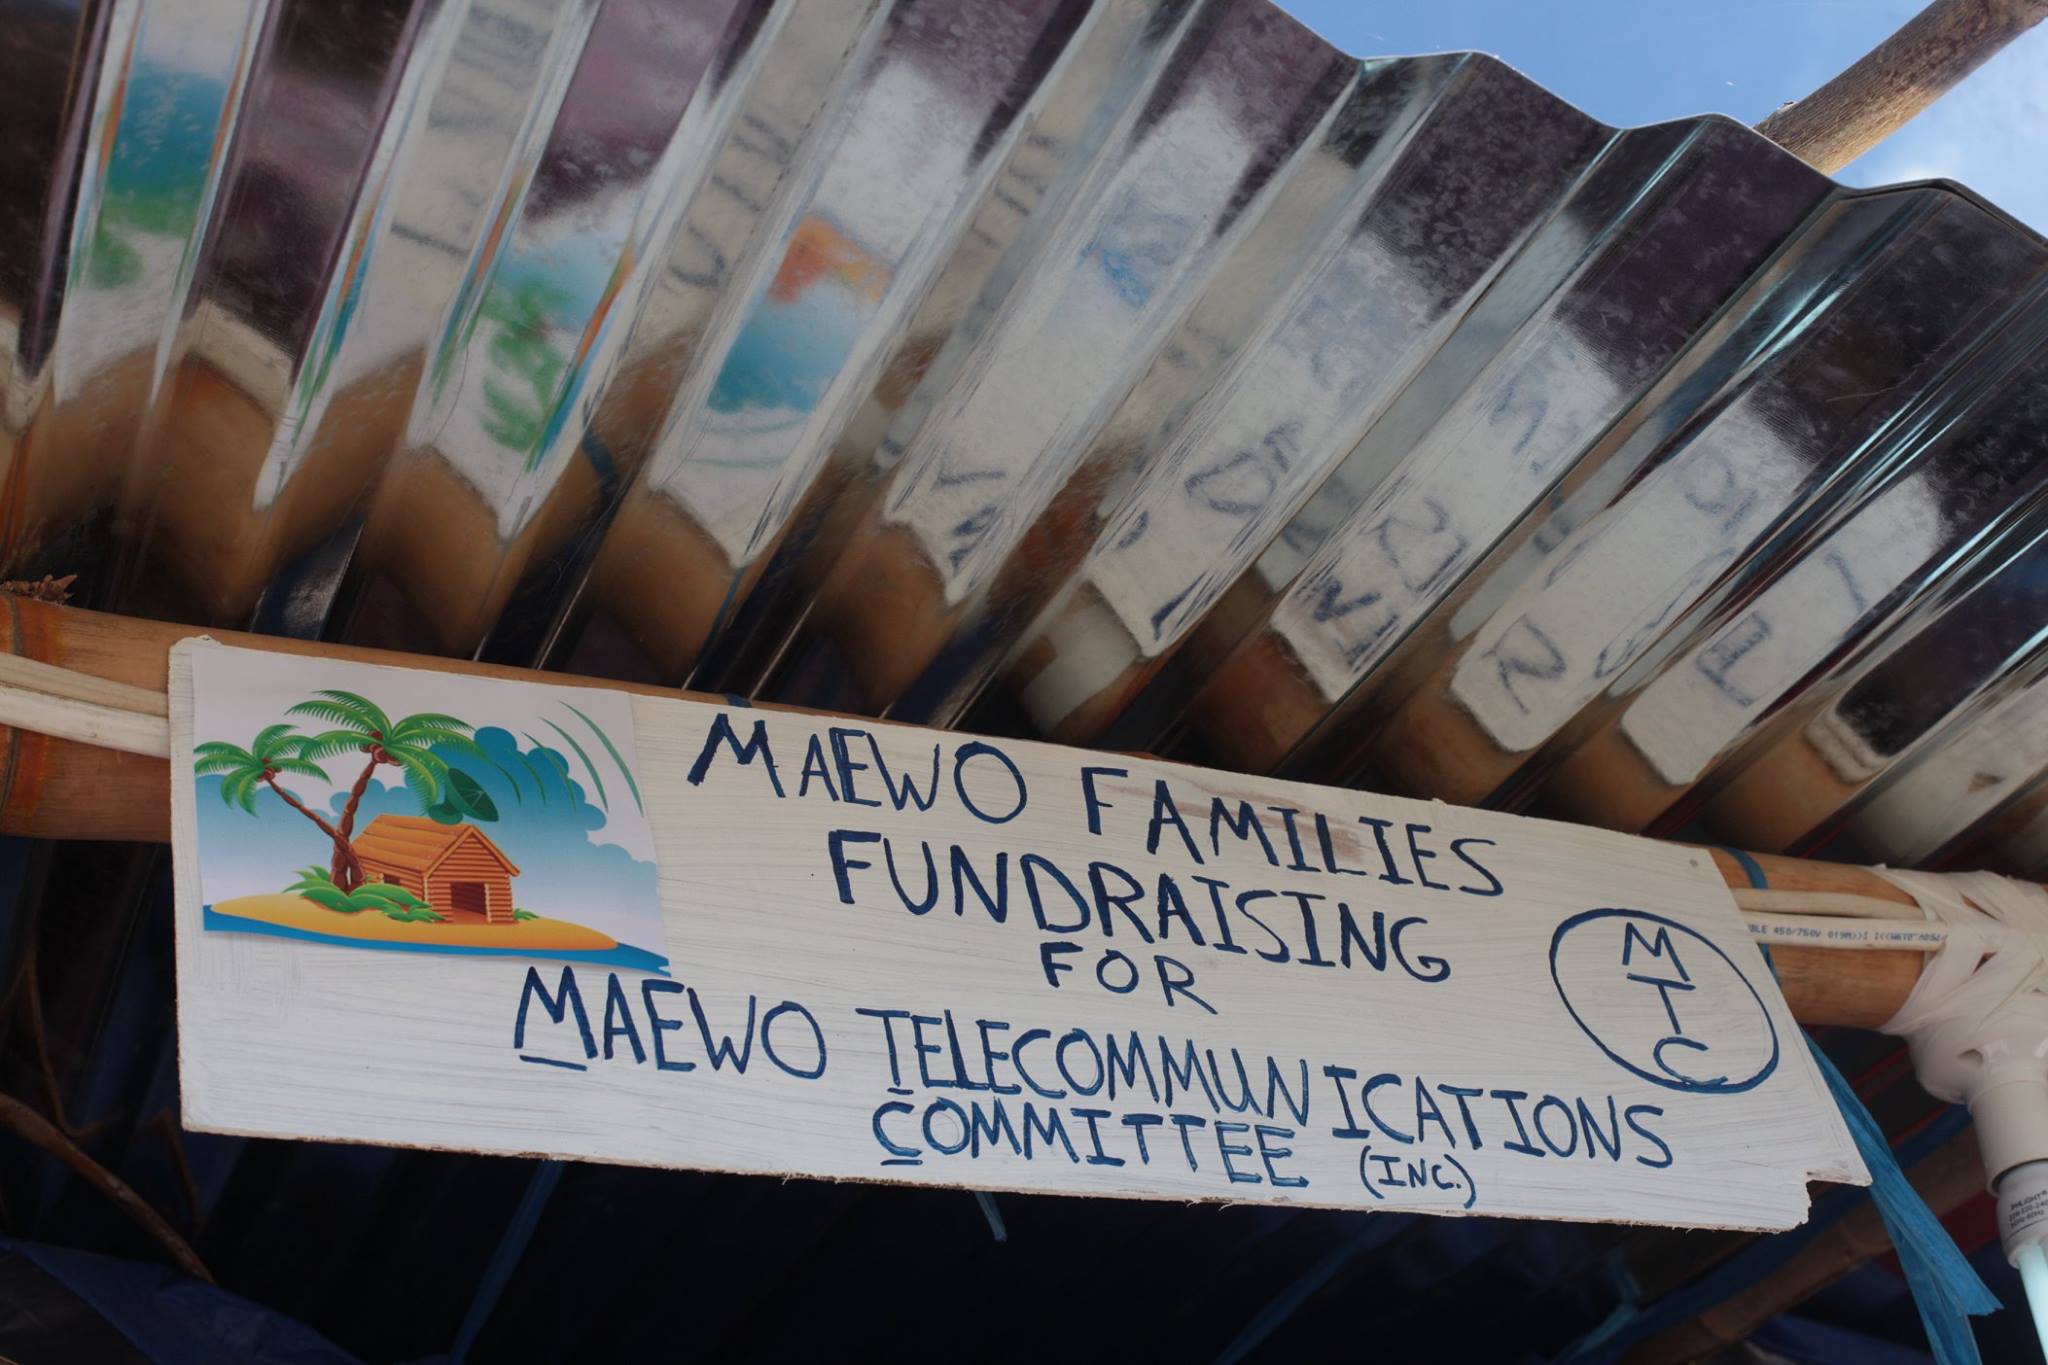 MTC is the first community-led telecommunications committee ever in Vanuatu